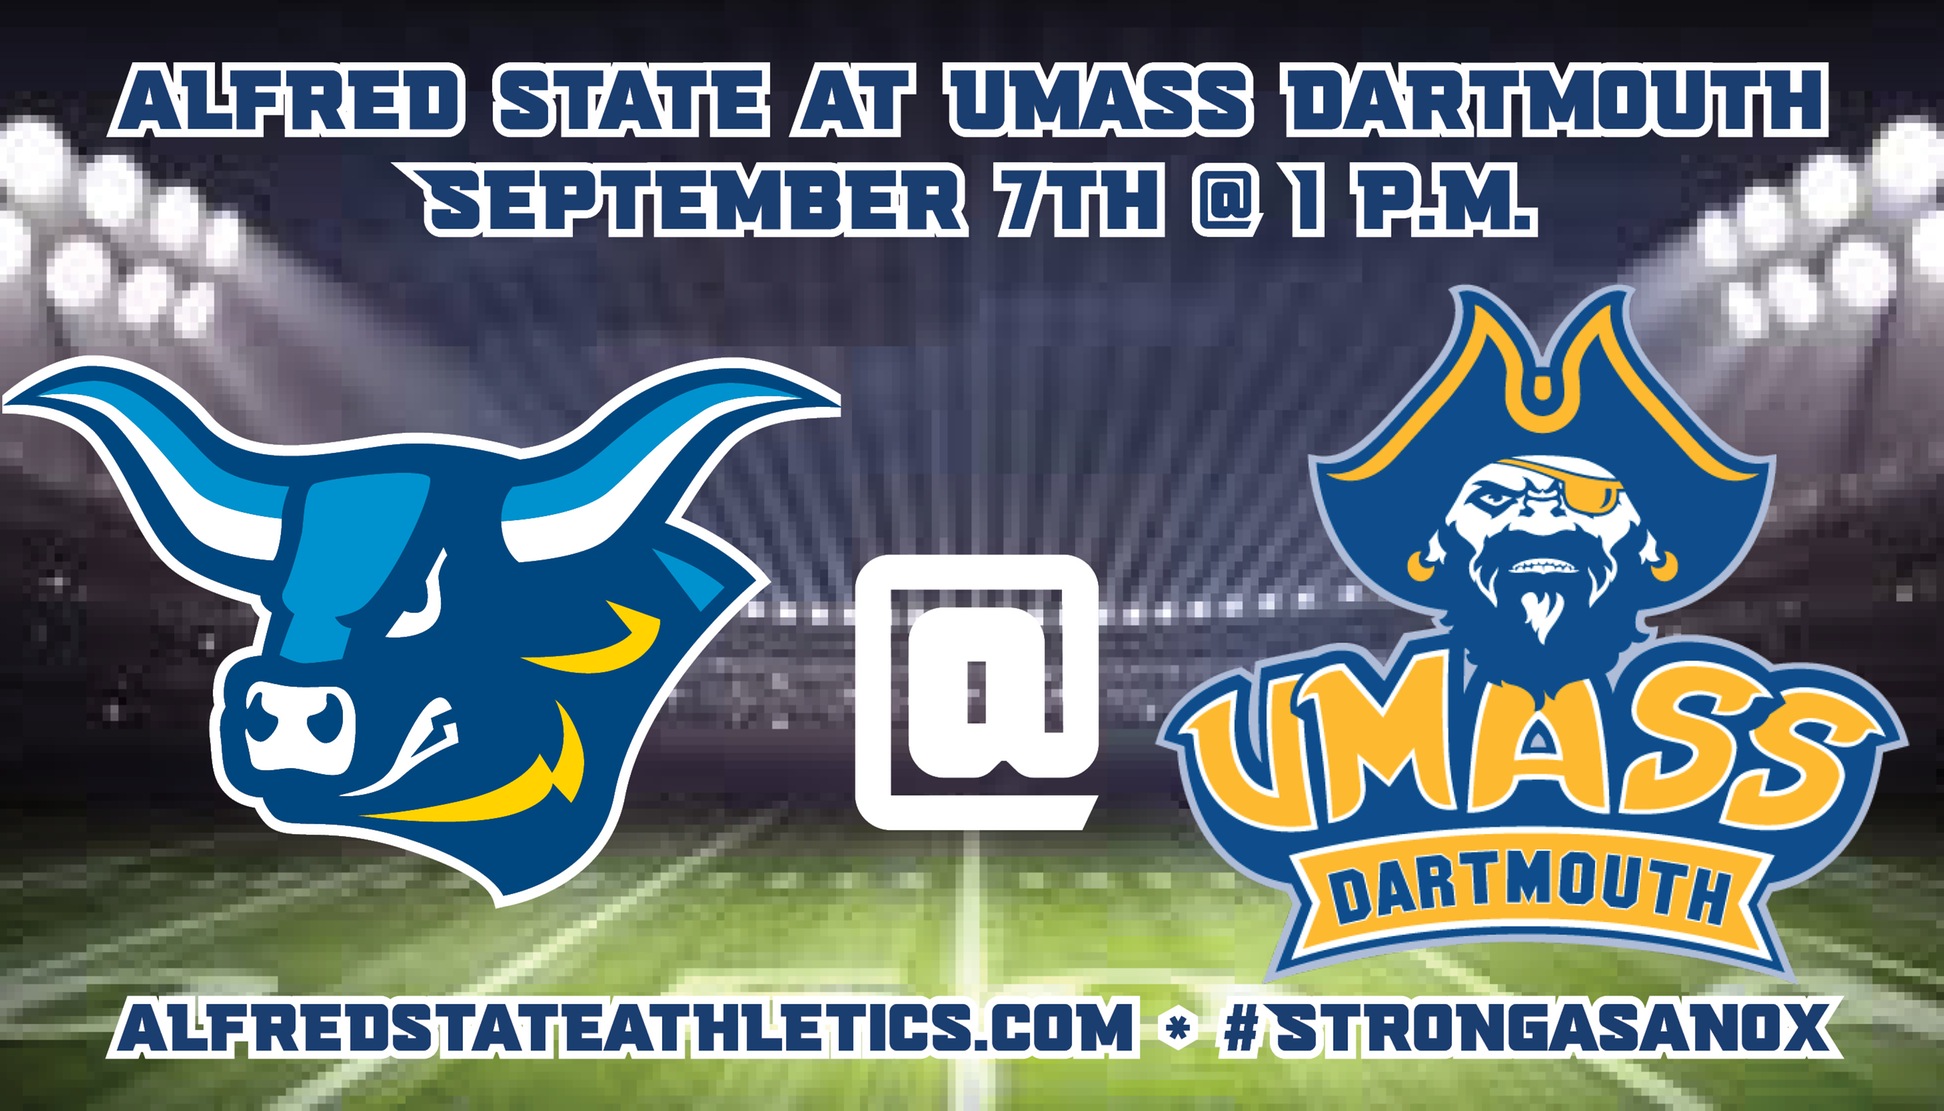 Alfred State football travels to UMass Dartmouth to open up the 2019 season.